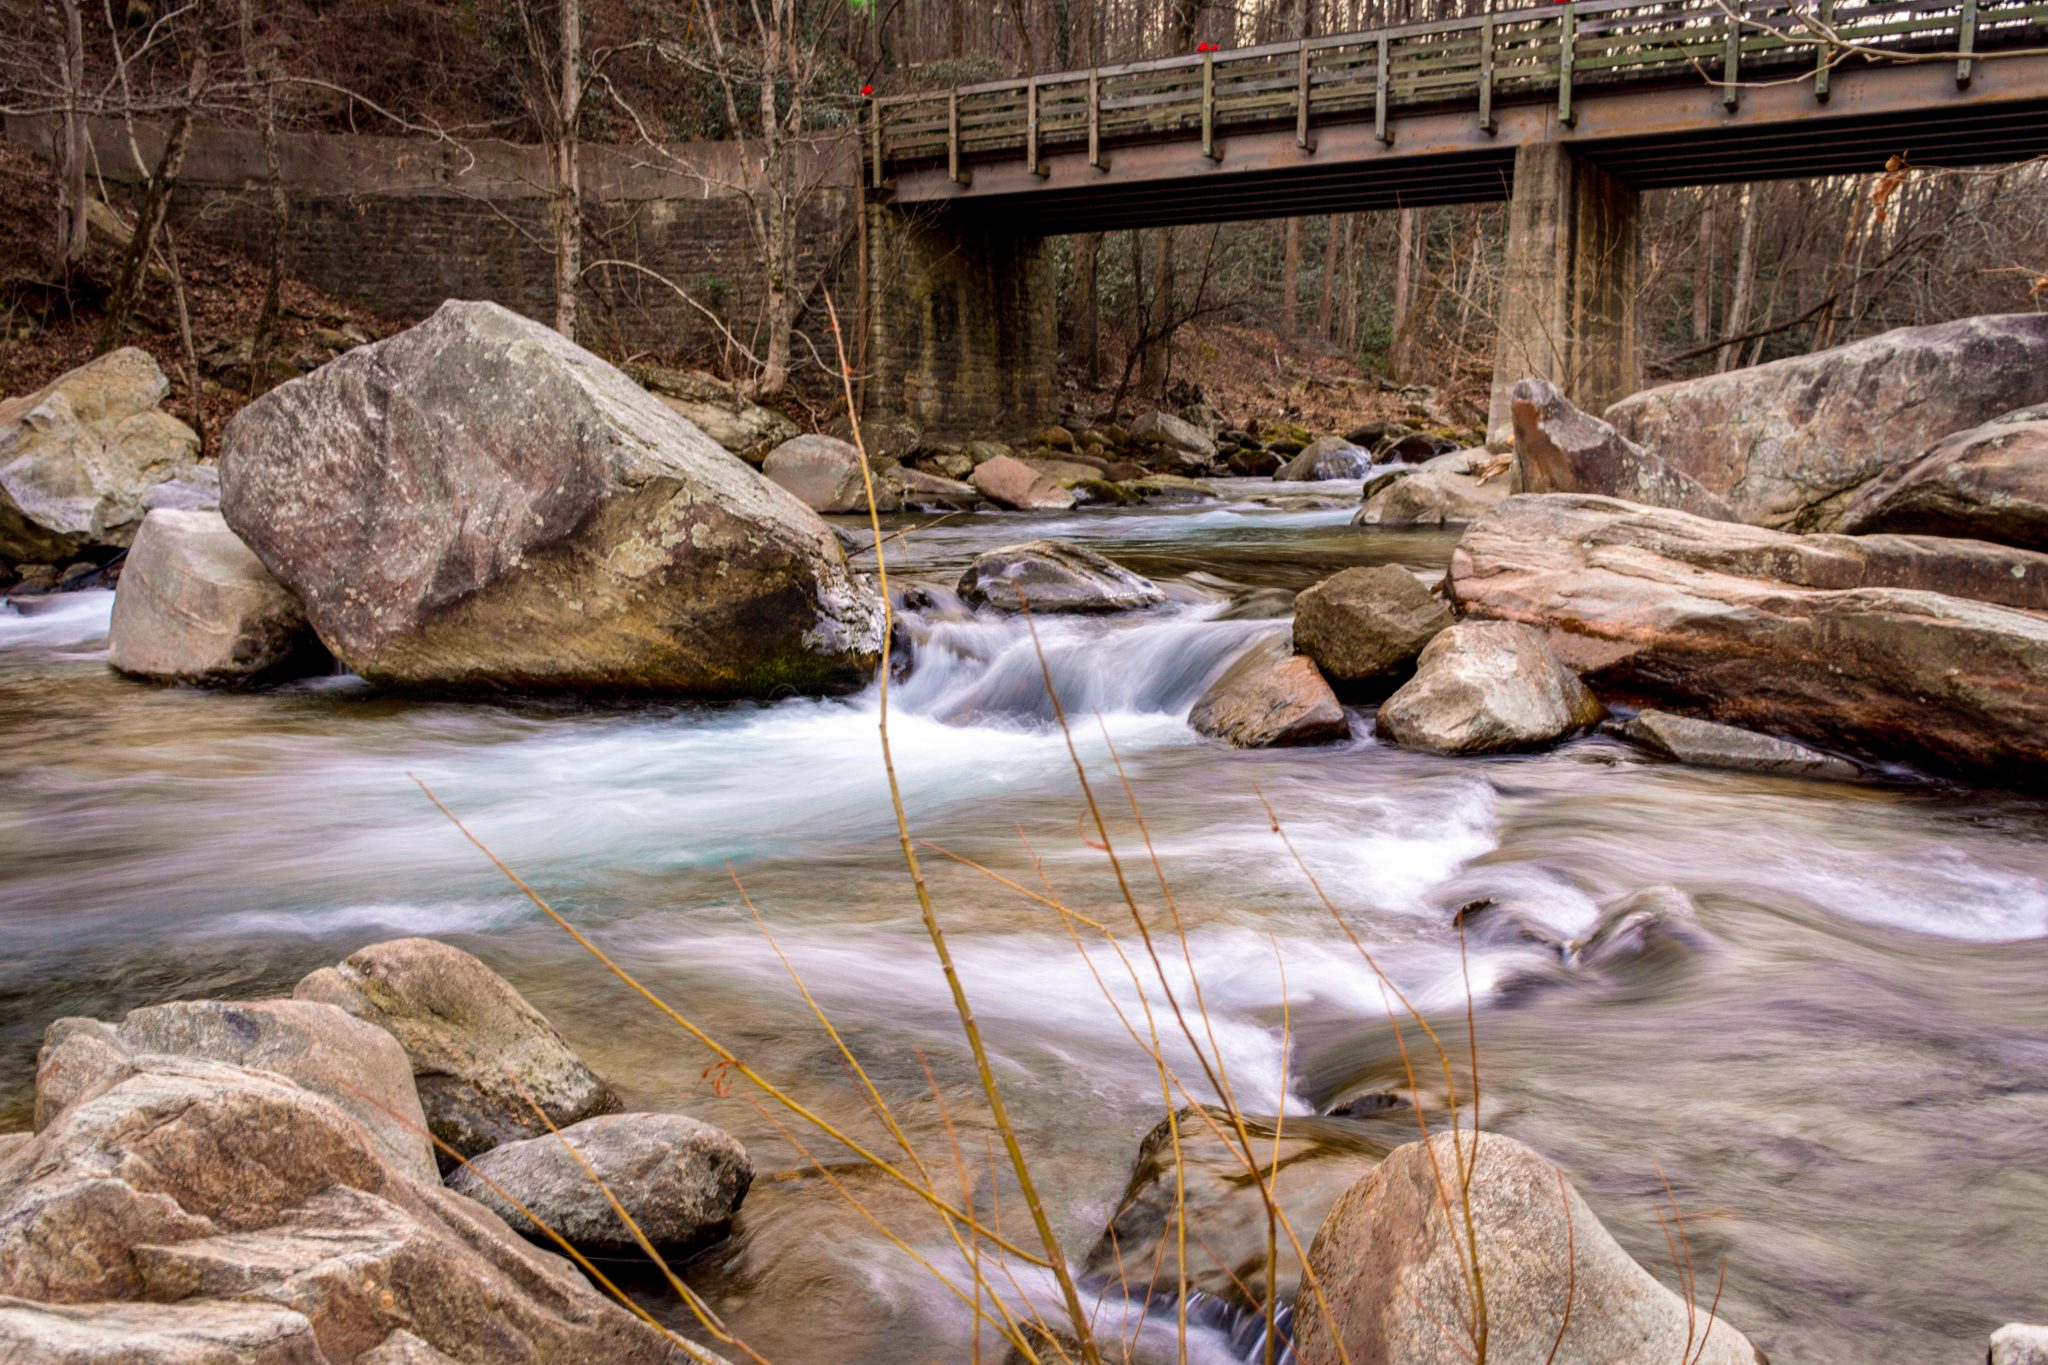 Long exposure of a shallow, rocky river